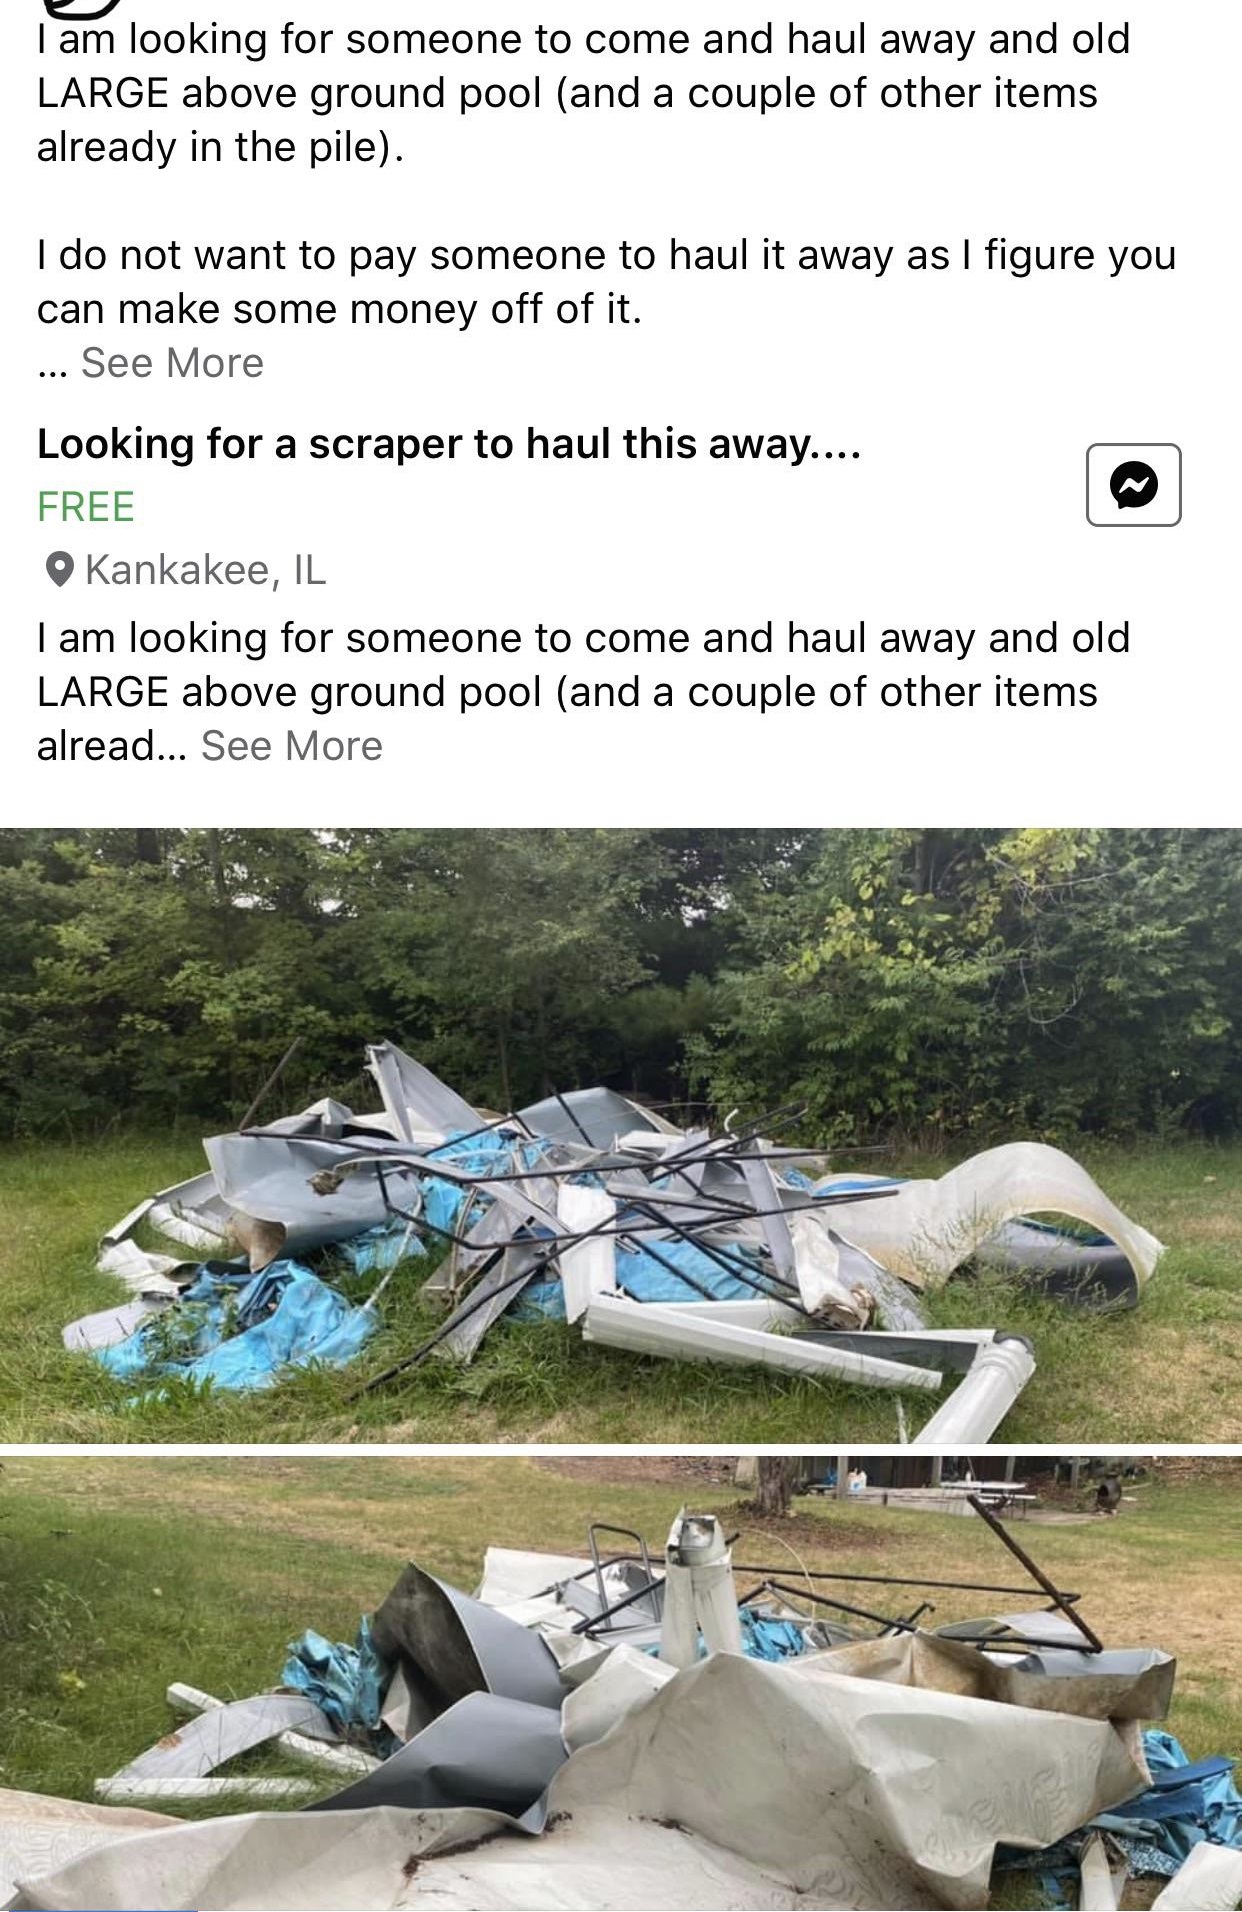 waste - I am looking for someone to come and haul away and old Large above ground pool and a couple of other items already in the pile. I do not want to pay someone to haul it away as I figure you can make some money off of it. ... See More Looking for a 